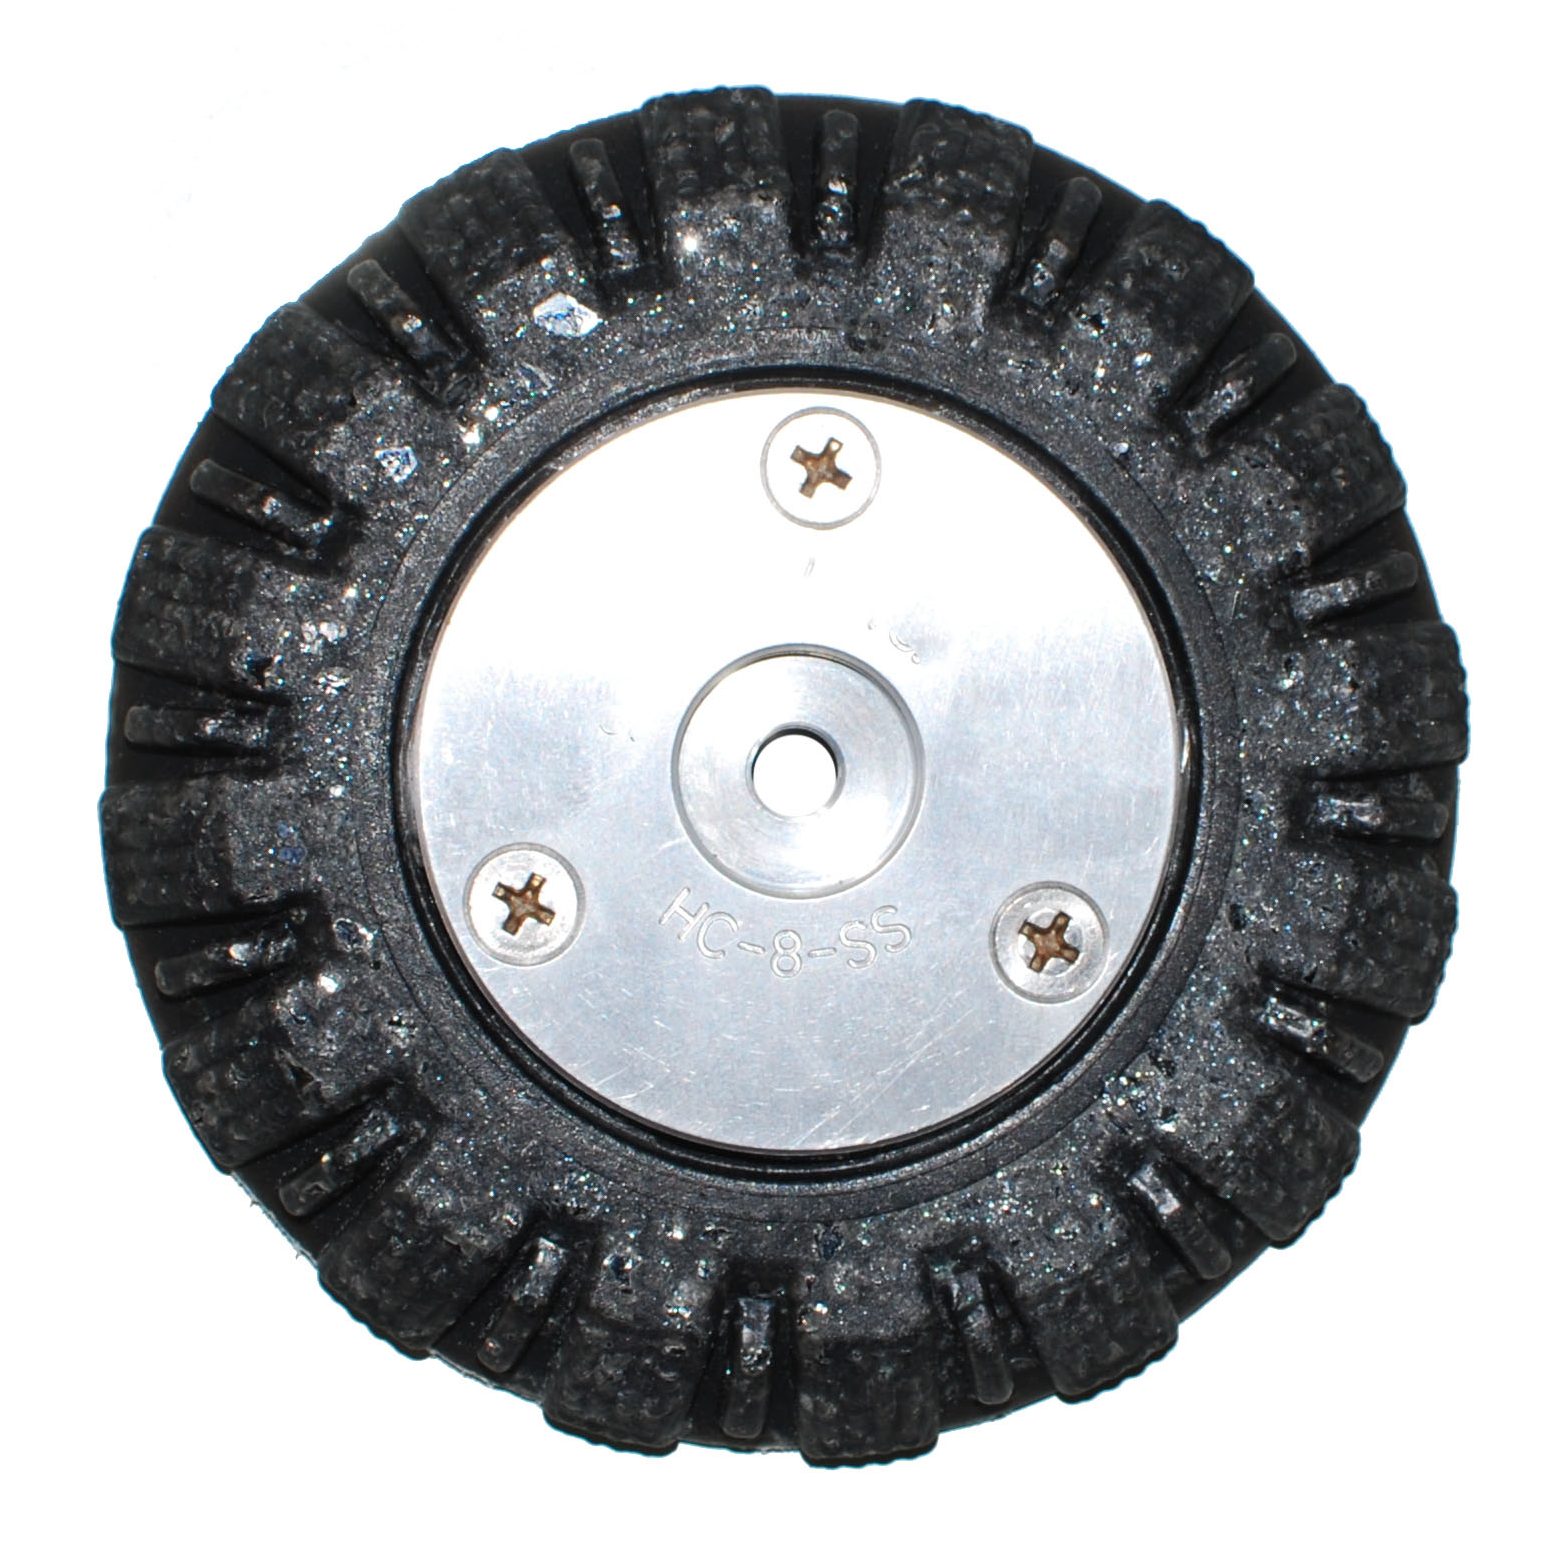 tg cues compatible wheel parts by TruGrit Traction